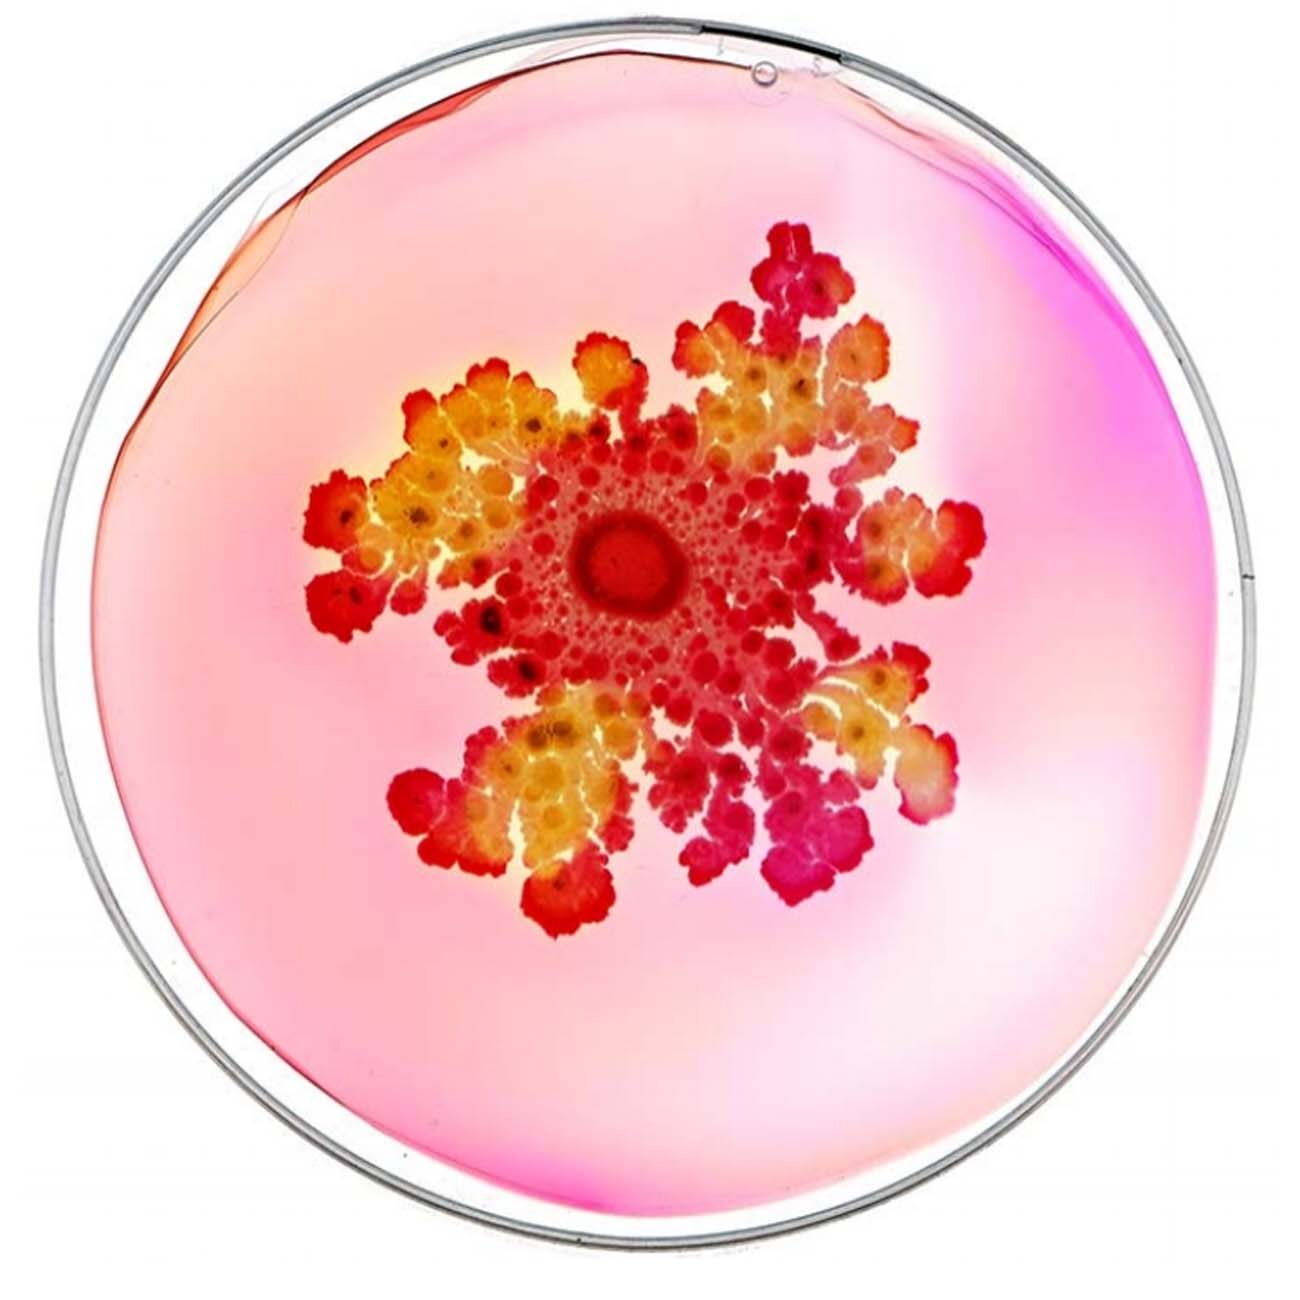 A petrie dish with a vibrant pink fluid and bacteria growth